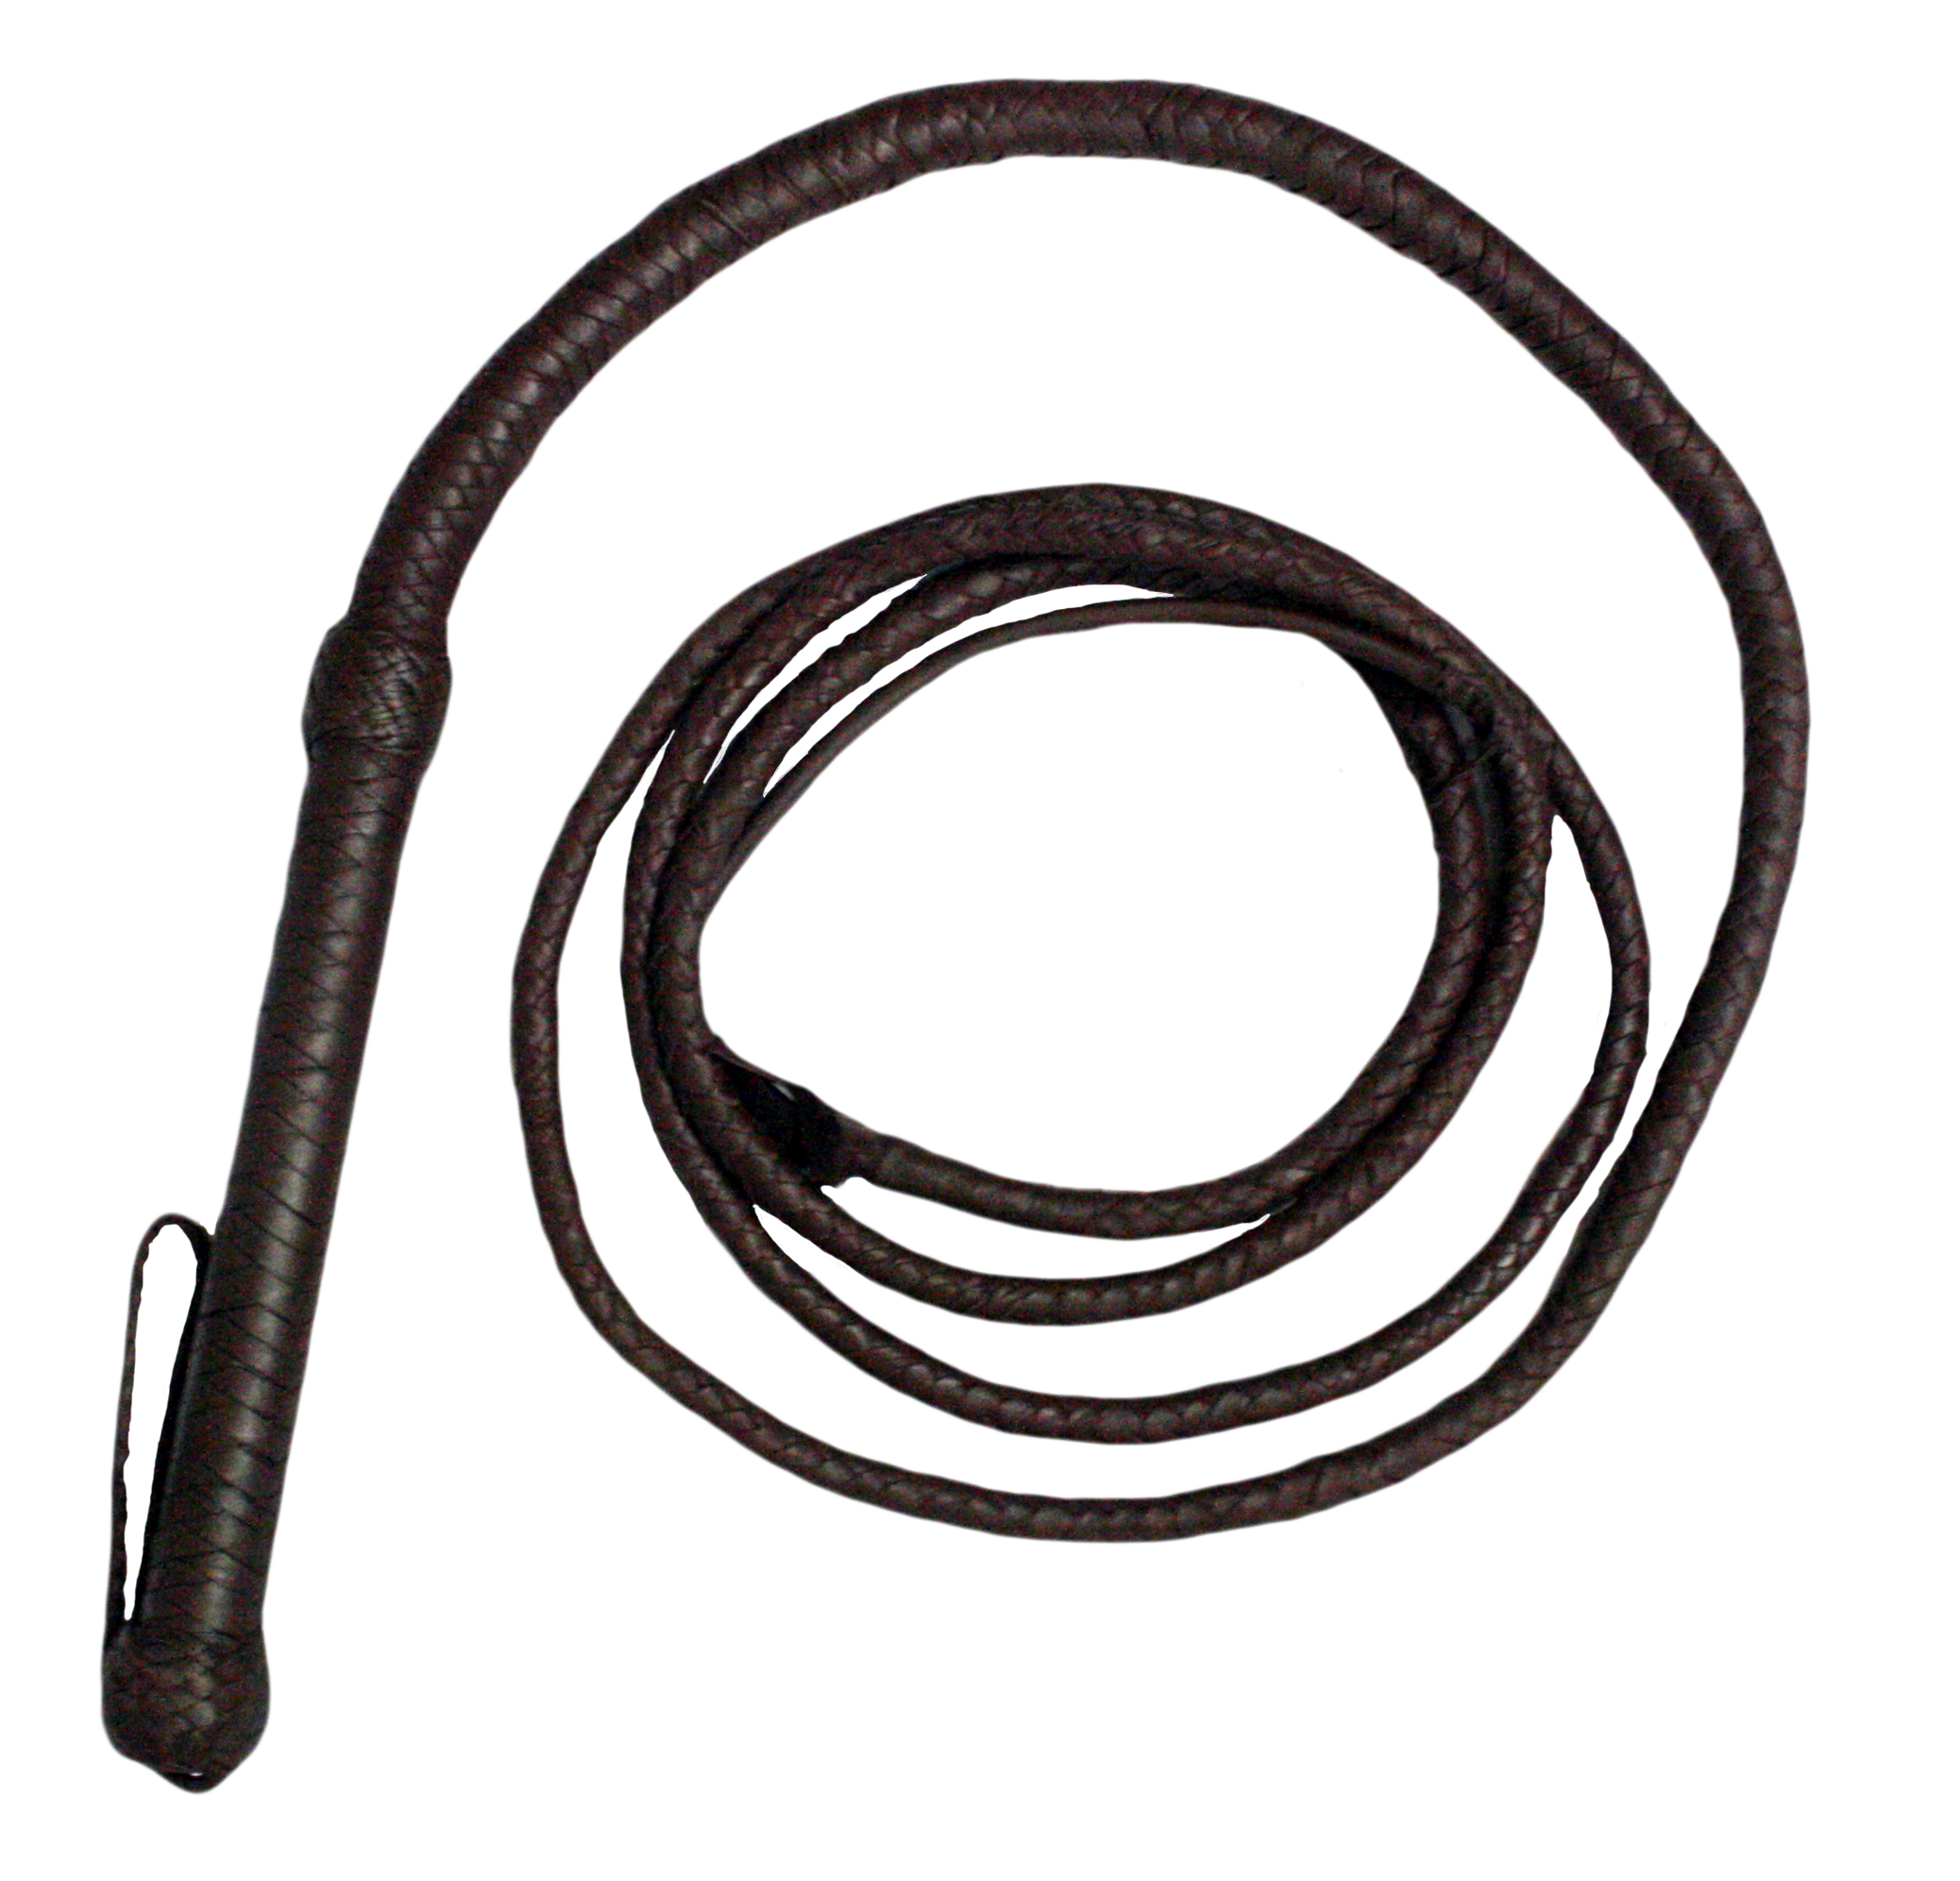 Png image purepng free. Whip clipart leather whip